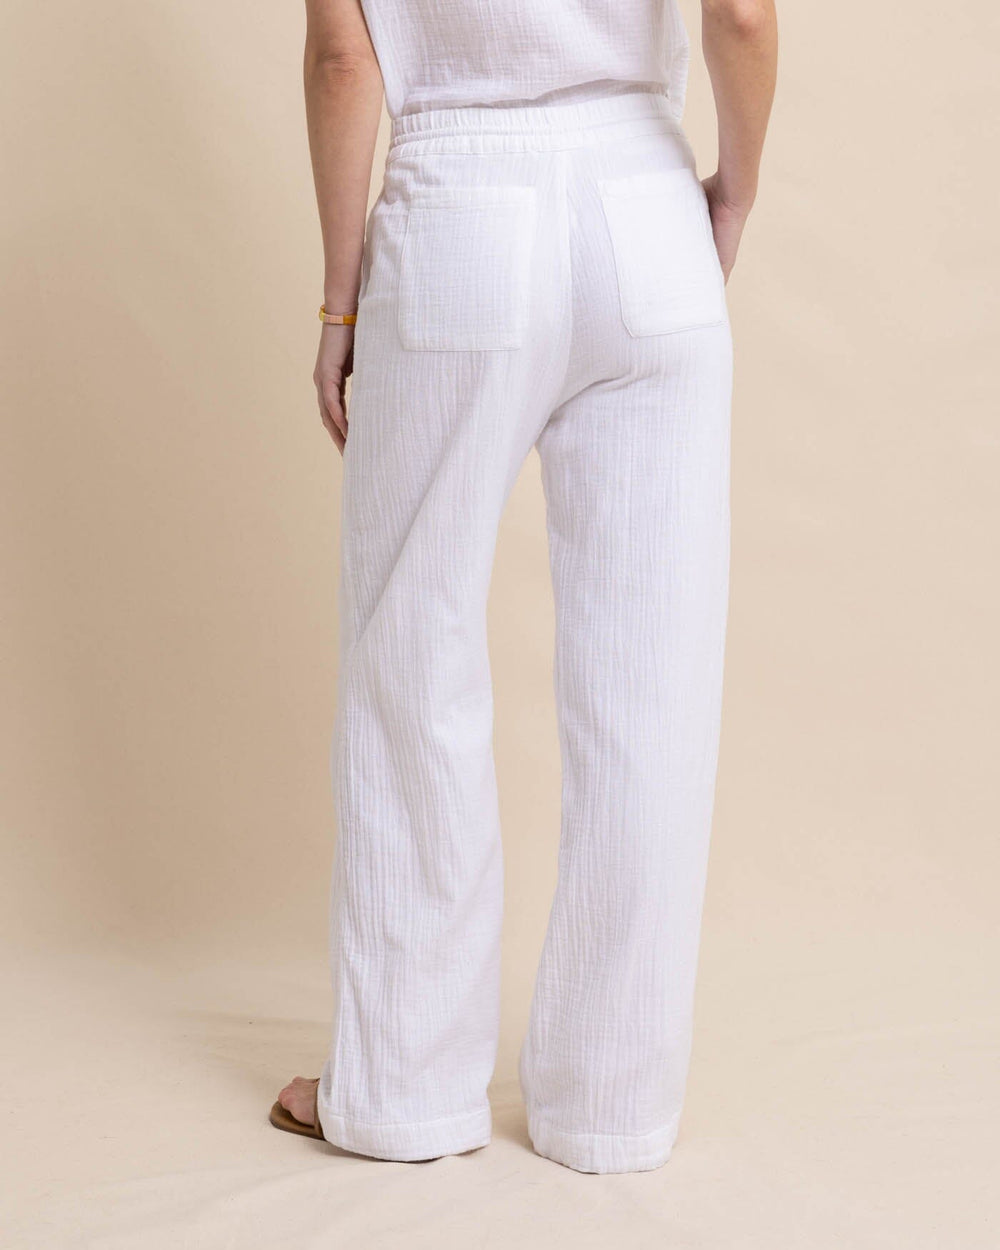 The back view of the Southern Tide Laken Wide Leg Pant by Southern Tide - Classic White